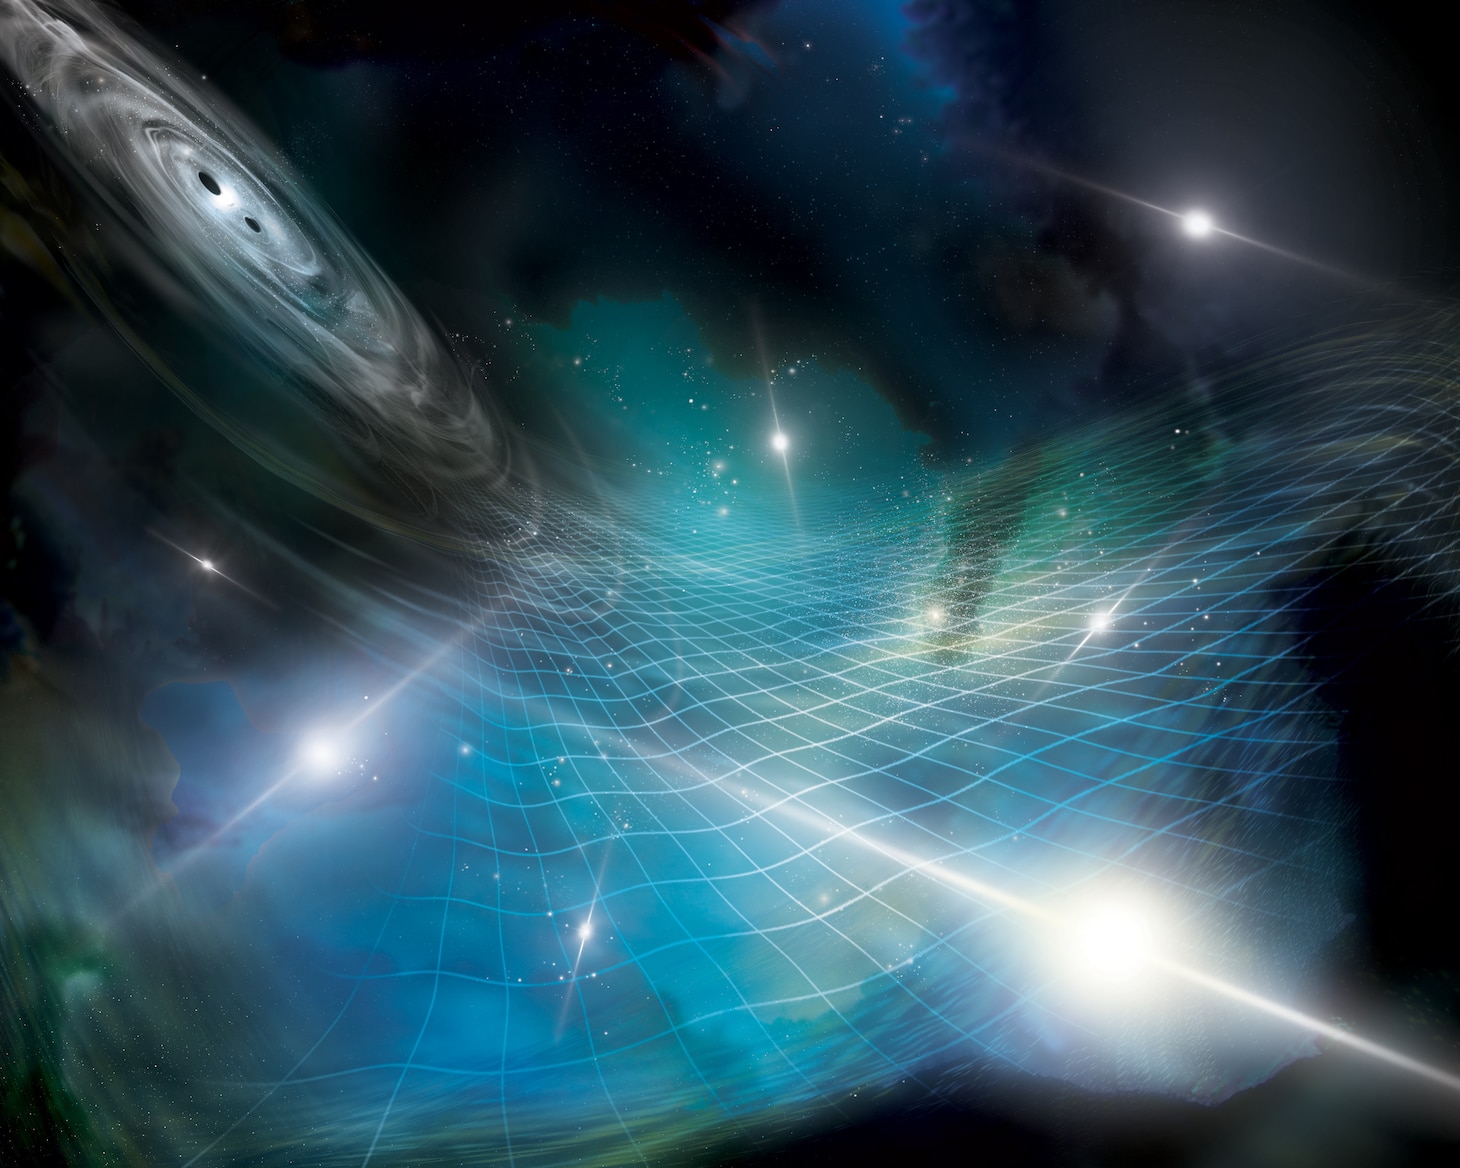 Artist’s interpretation of an array of pulsars being affected by gravitational ripples produced by a supermassive black hole binary in a distant galaxy.

Credit: Aurore Simonnet for the NANOGrav Collaboration

Public Release